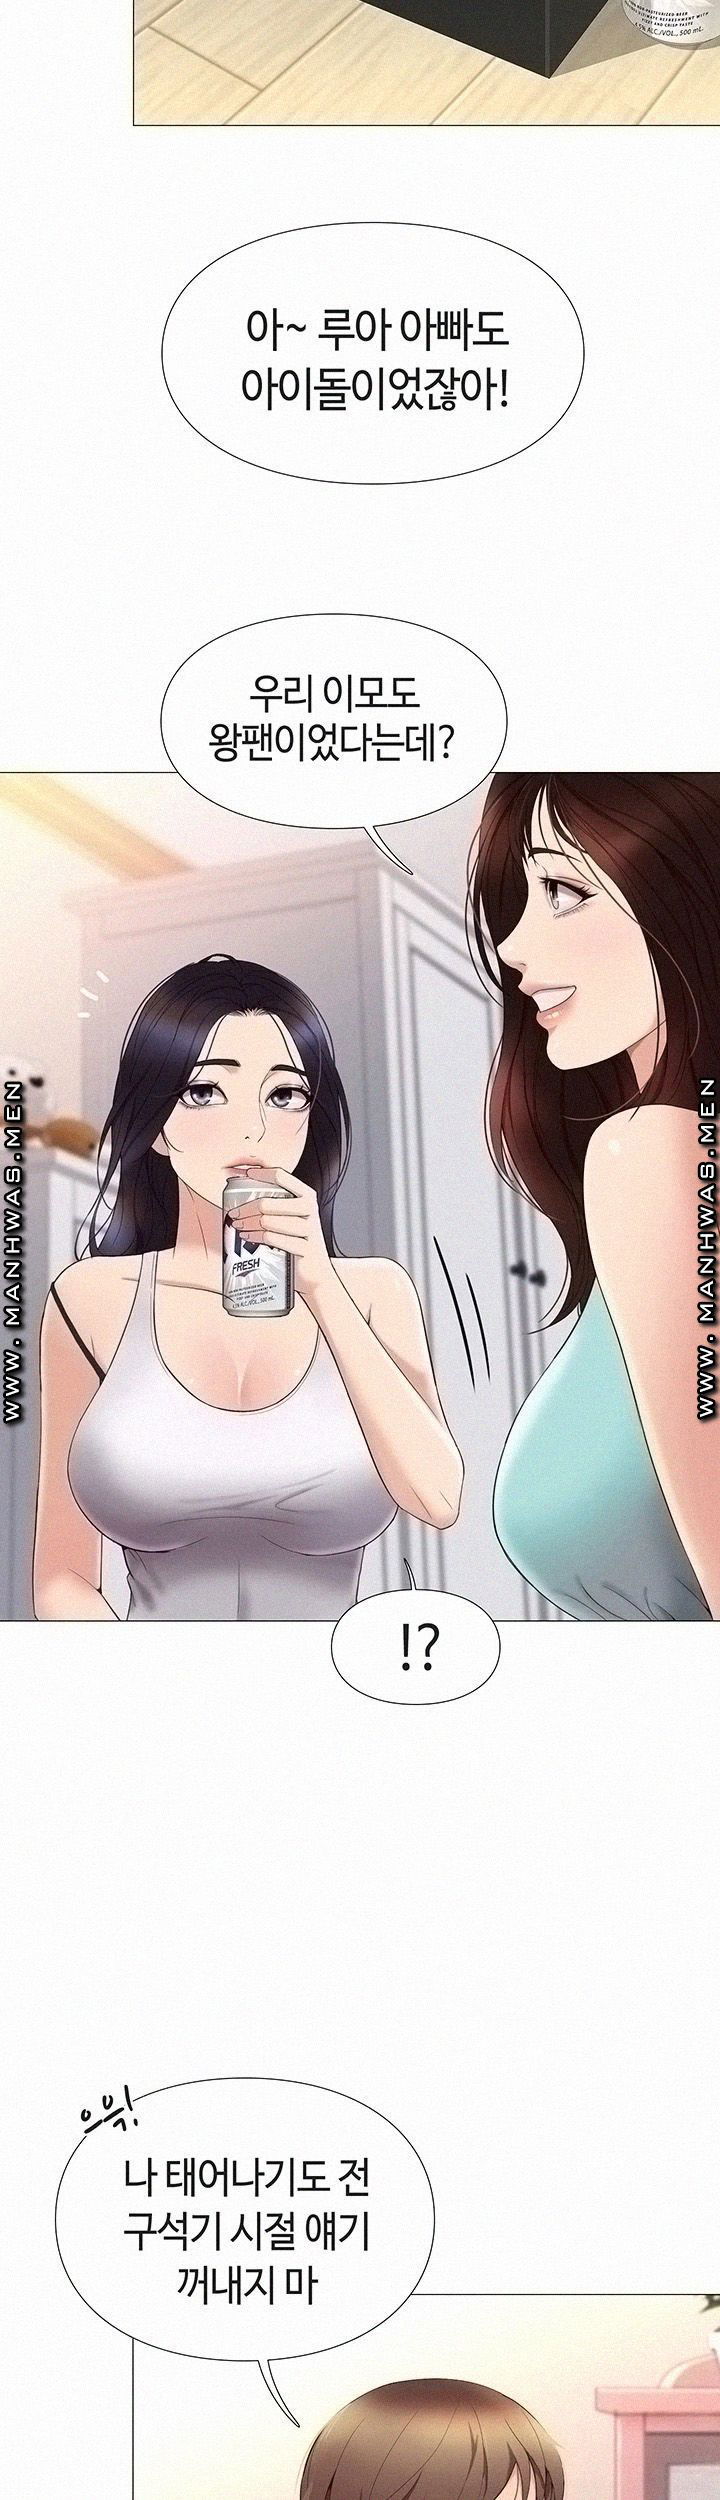 daughter-friend-raw-chap-2-55